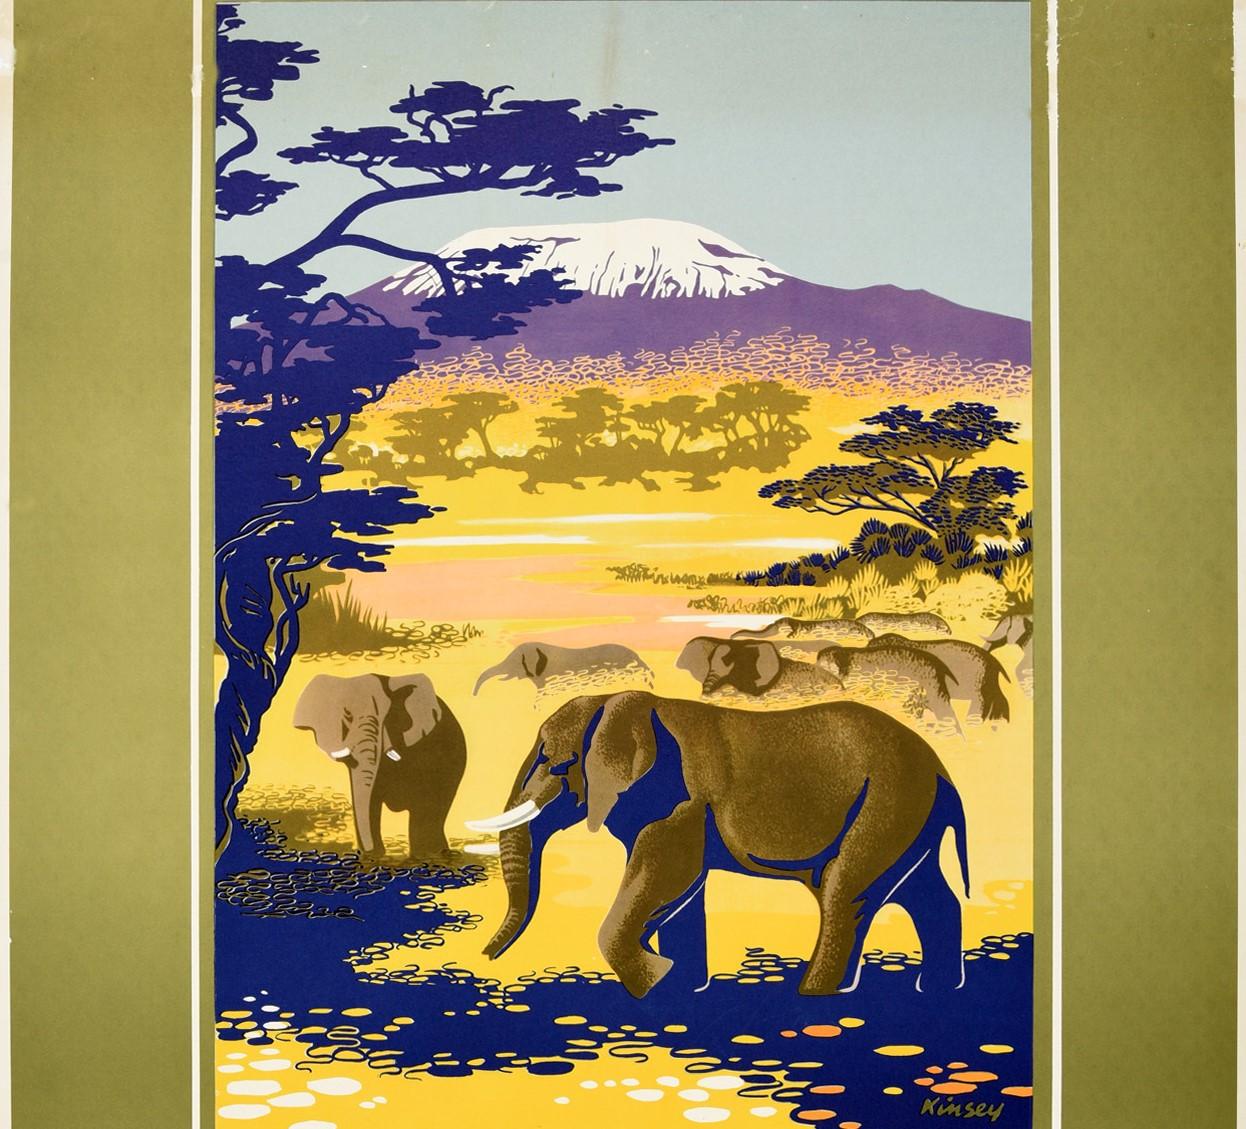 Original vintage travel poster for Tanganyika Kilimanjaro for your African Climbing and Big Game Holiday ... Consult your Favourite Travel Agent for Further Information featuring a scenic view of the snow topped dormant volcano Mount Kilimanjaro